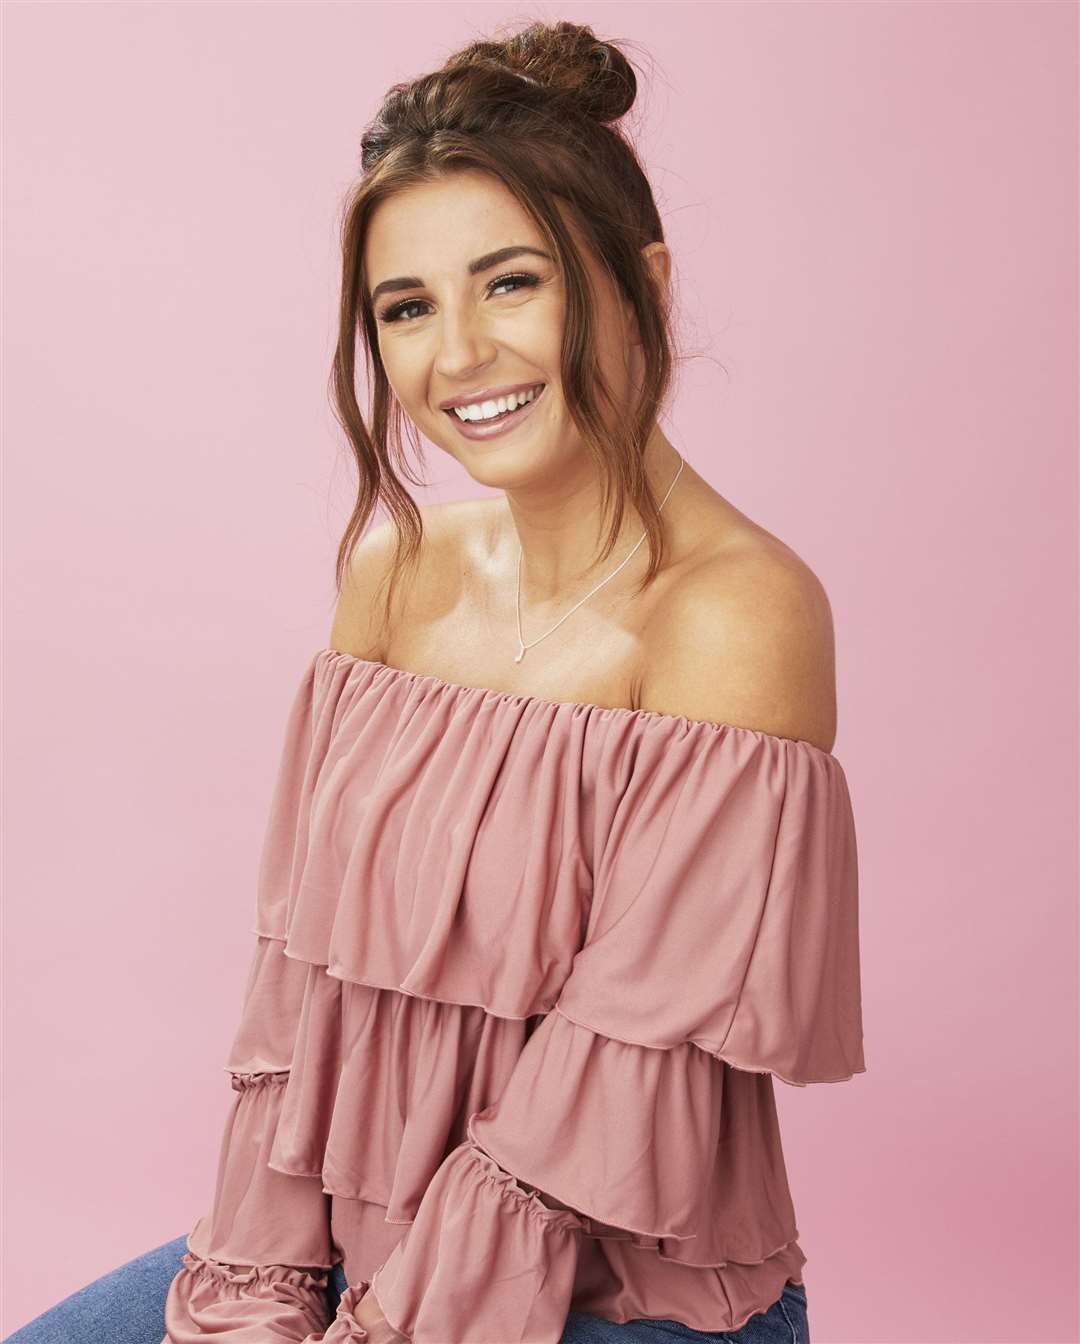 Dani Dyer will be at Bluewater